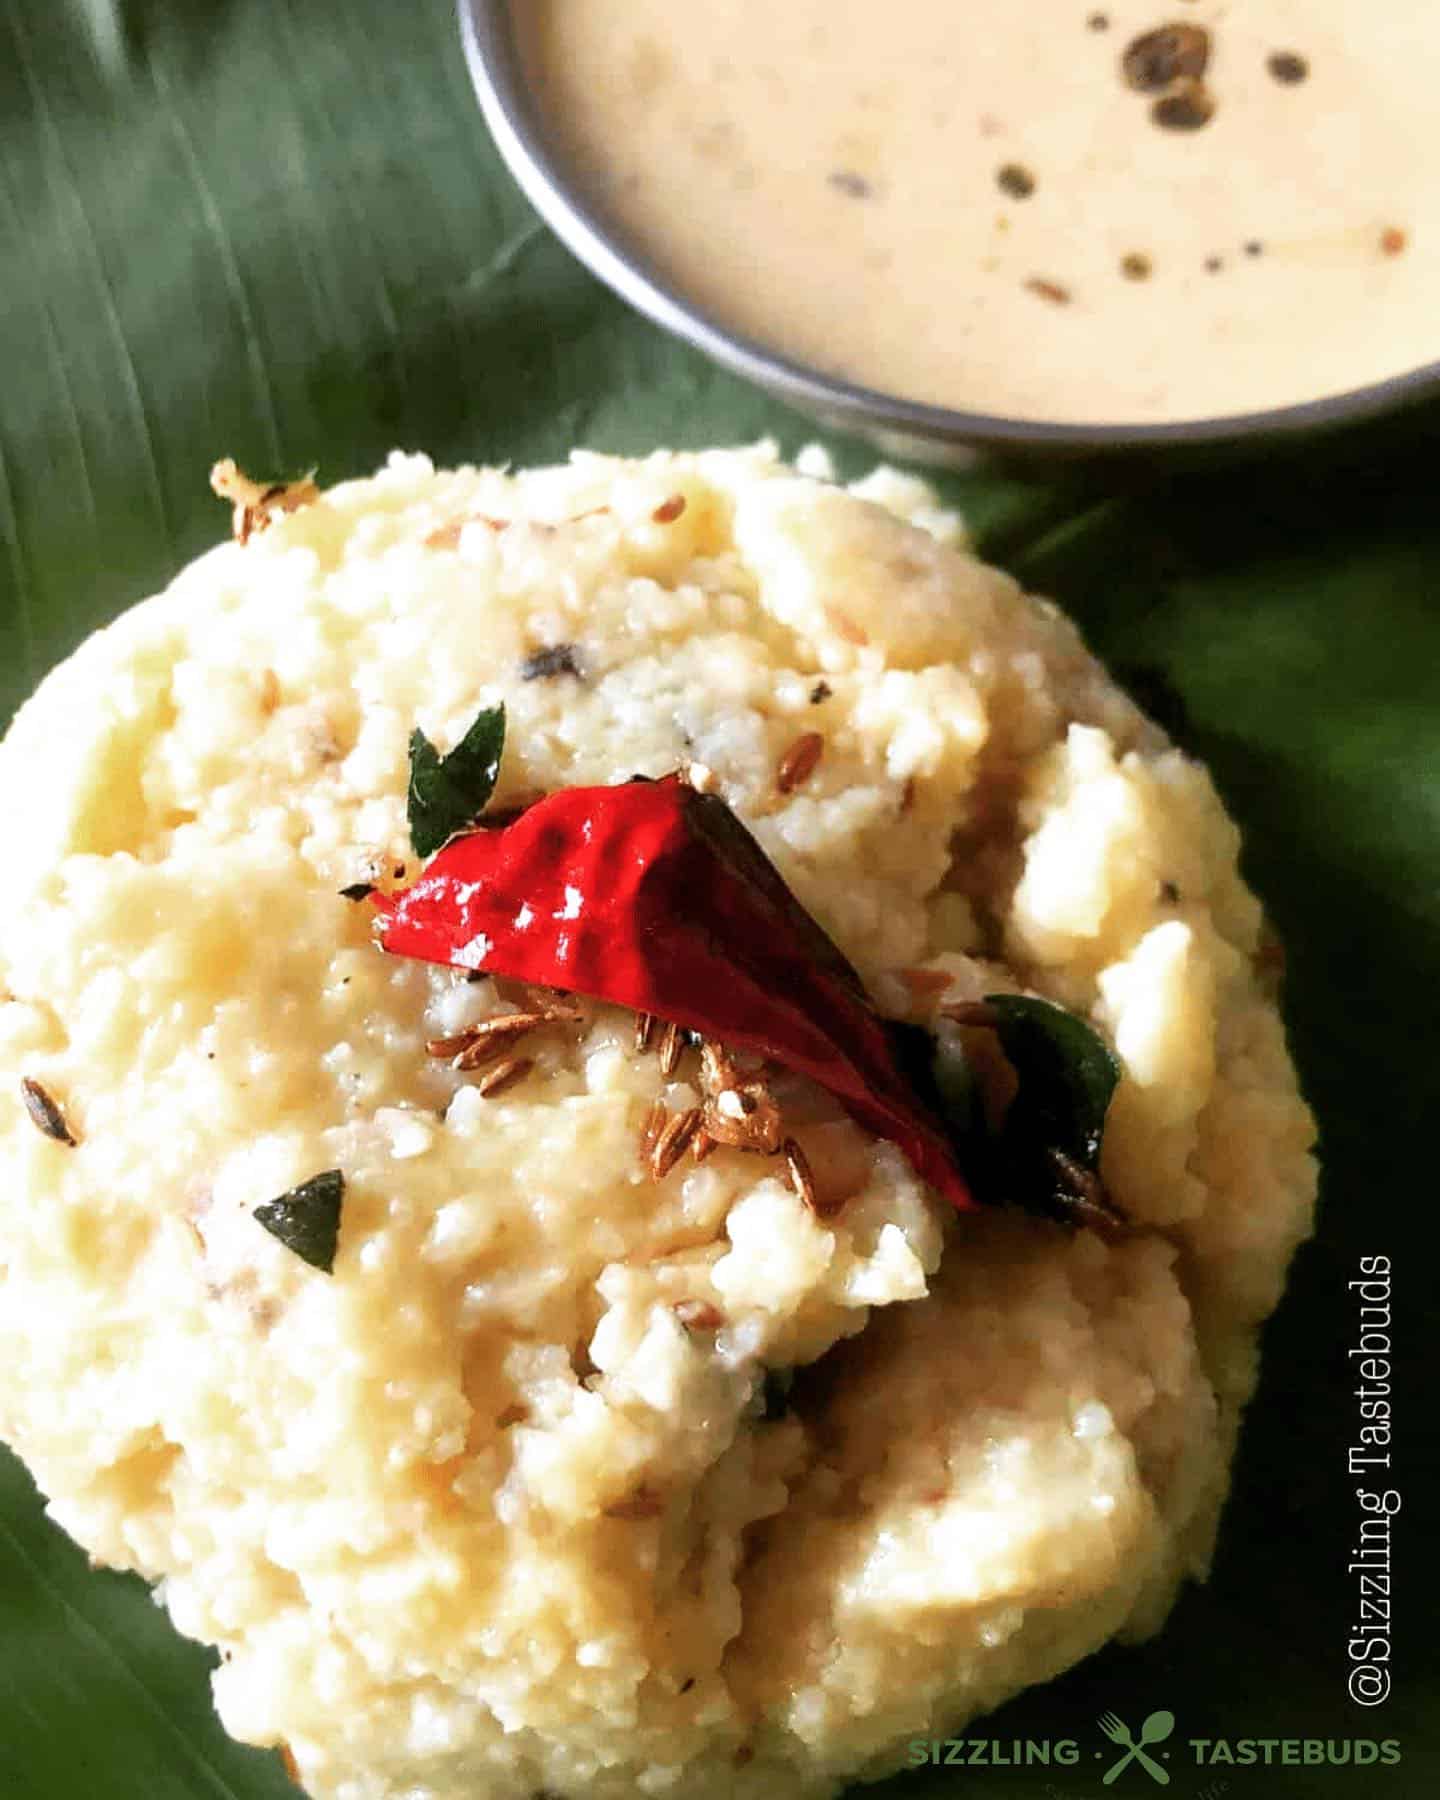 Hola peeps !

#weekendsorted with Samai or Little Millet Pongal. 

What is this dish all about ? 
A hearty, Glutenfree breakfast or brunch for those lazy weekends when you don’t have to slog too much to put up a healthy, delicious meal. Little millet is also known as சாமை அரிசி in Tamil, ಸಾಮೆ ಅಕ್ಕಿ in Kannada and cooks exactly like rice but lower GI. 

Do try this SAMAI PONGAL that is 
✅ fuss free ONE POT MEAL
✅ gluten free (can be vegan too if you skip the ghee / use vegan butter)
✅ Filling and nutritious 
✅ made with 100% brown top millets 
✅ diabetic friendly too (no rice recipe)

Best eaten with Coconut Chutney, but of course served here with our favourite Dangar Pachadi - Urad Dal Raita… (somehow Sambhar + pongal is a no-no at home!)

What is your weekend looking like ?

👉👉 follow @sizzlingtastebuds for more #breakfast recipes - all 100% homemade and healthy. ❤️❤️
👉👉 Recipe link in the bio 👆 @sizzlingtastebuds or simply DM me for the recipe. 
👉👉 Alternatively, simply GOOGLE Samai pongal Sizzling Tastebuds

 #sizzlingtastebuds #pongal #onepotmeal #healthy #breakfast #pongalrecipes #millets #healthyfood #littlemillet #samai #healthylifestyle #glutenfree #milletrecipes #healthyeating #Southindianbreakfast #indianfood #milletsaregood #sustainable #samaiarisi #siridhanya #sameakki #tambrahmcooking #southindianfood